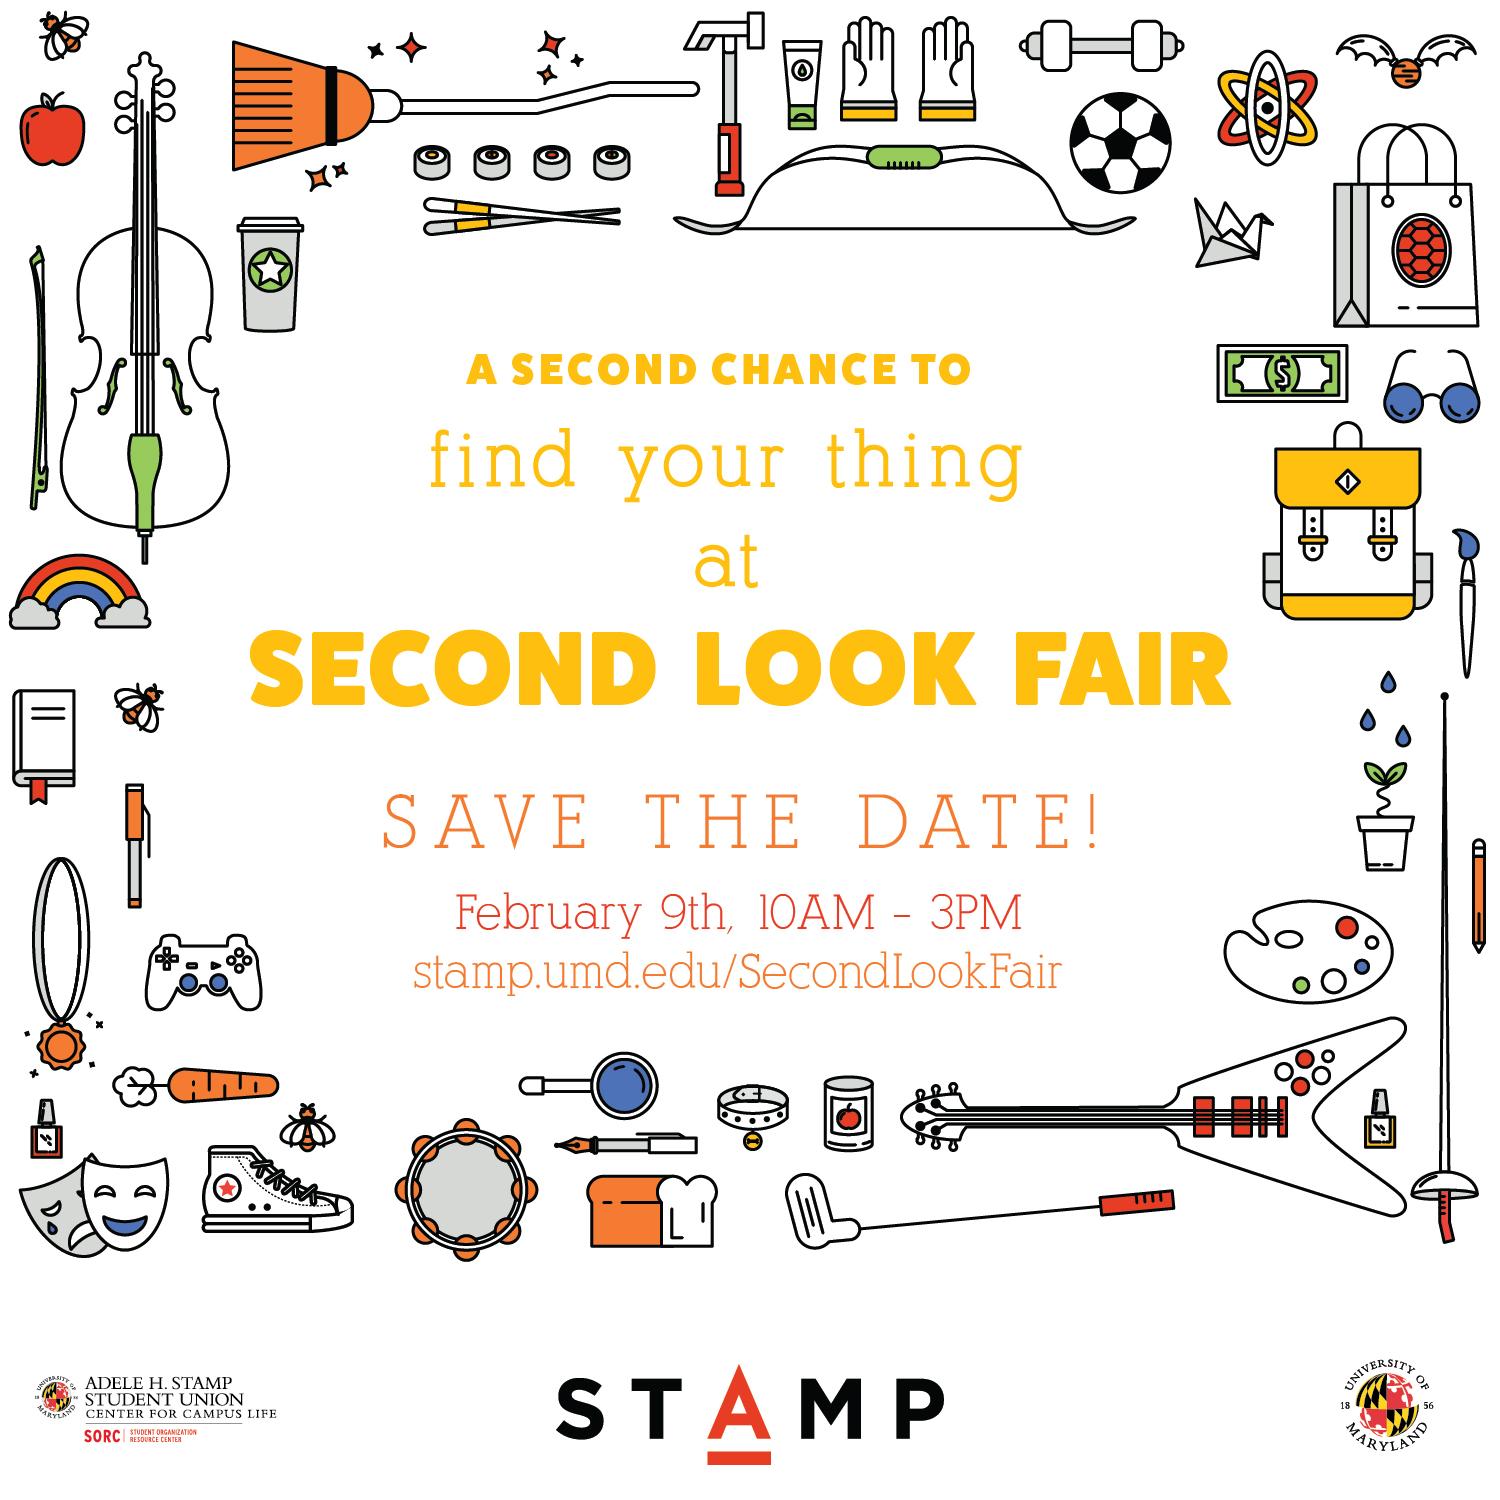 Second Look Fair, February 9, Save the Date